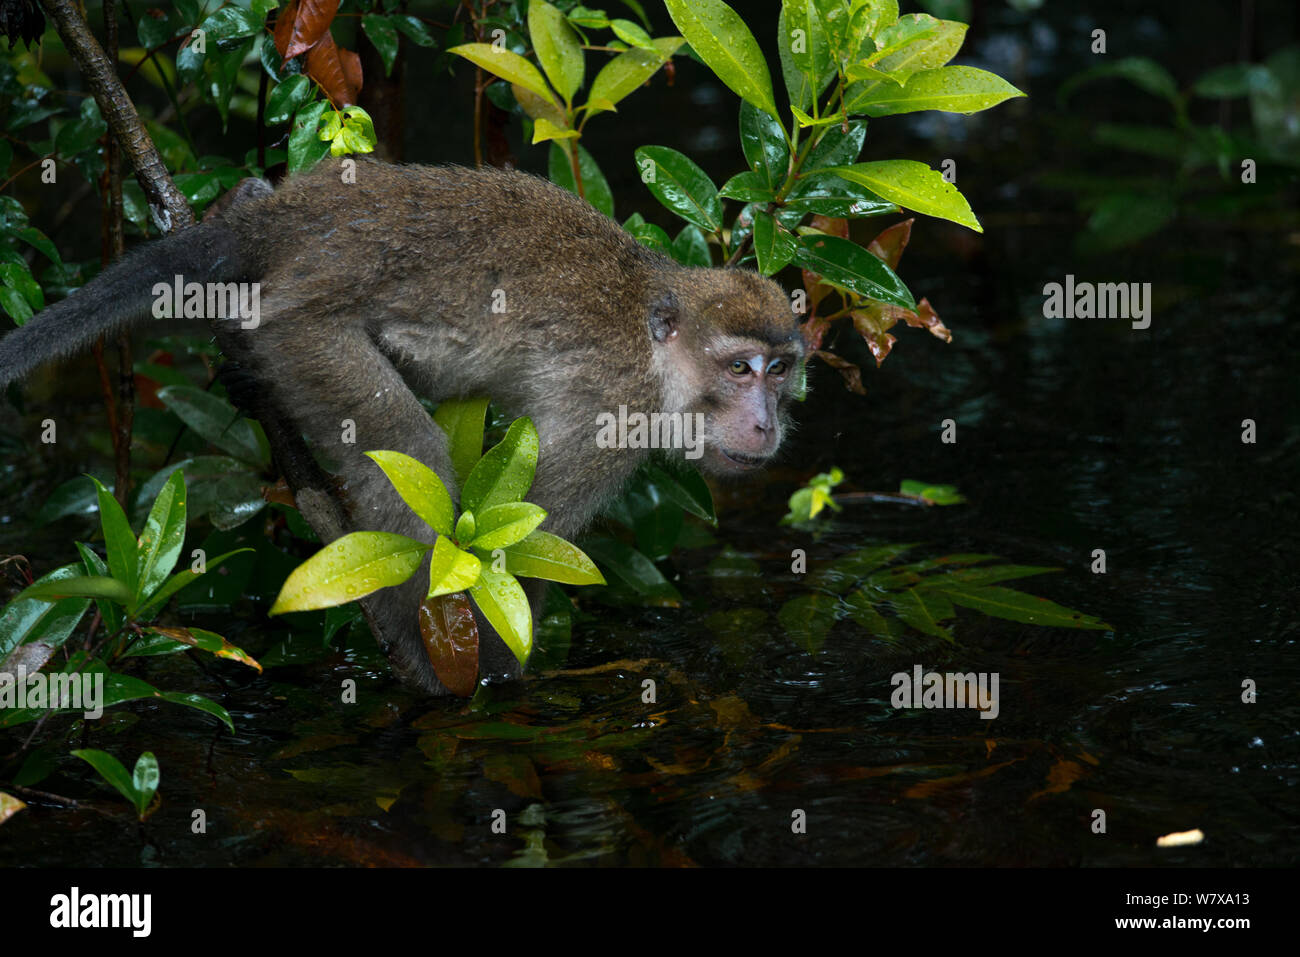 Long-tailed Macaque (Macaca fascicularis) getting into the water, Tanjung Puting National Park, Borneo, Indonesia. Stock Photo